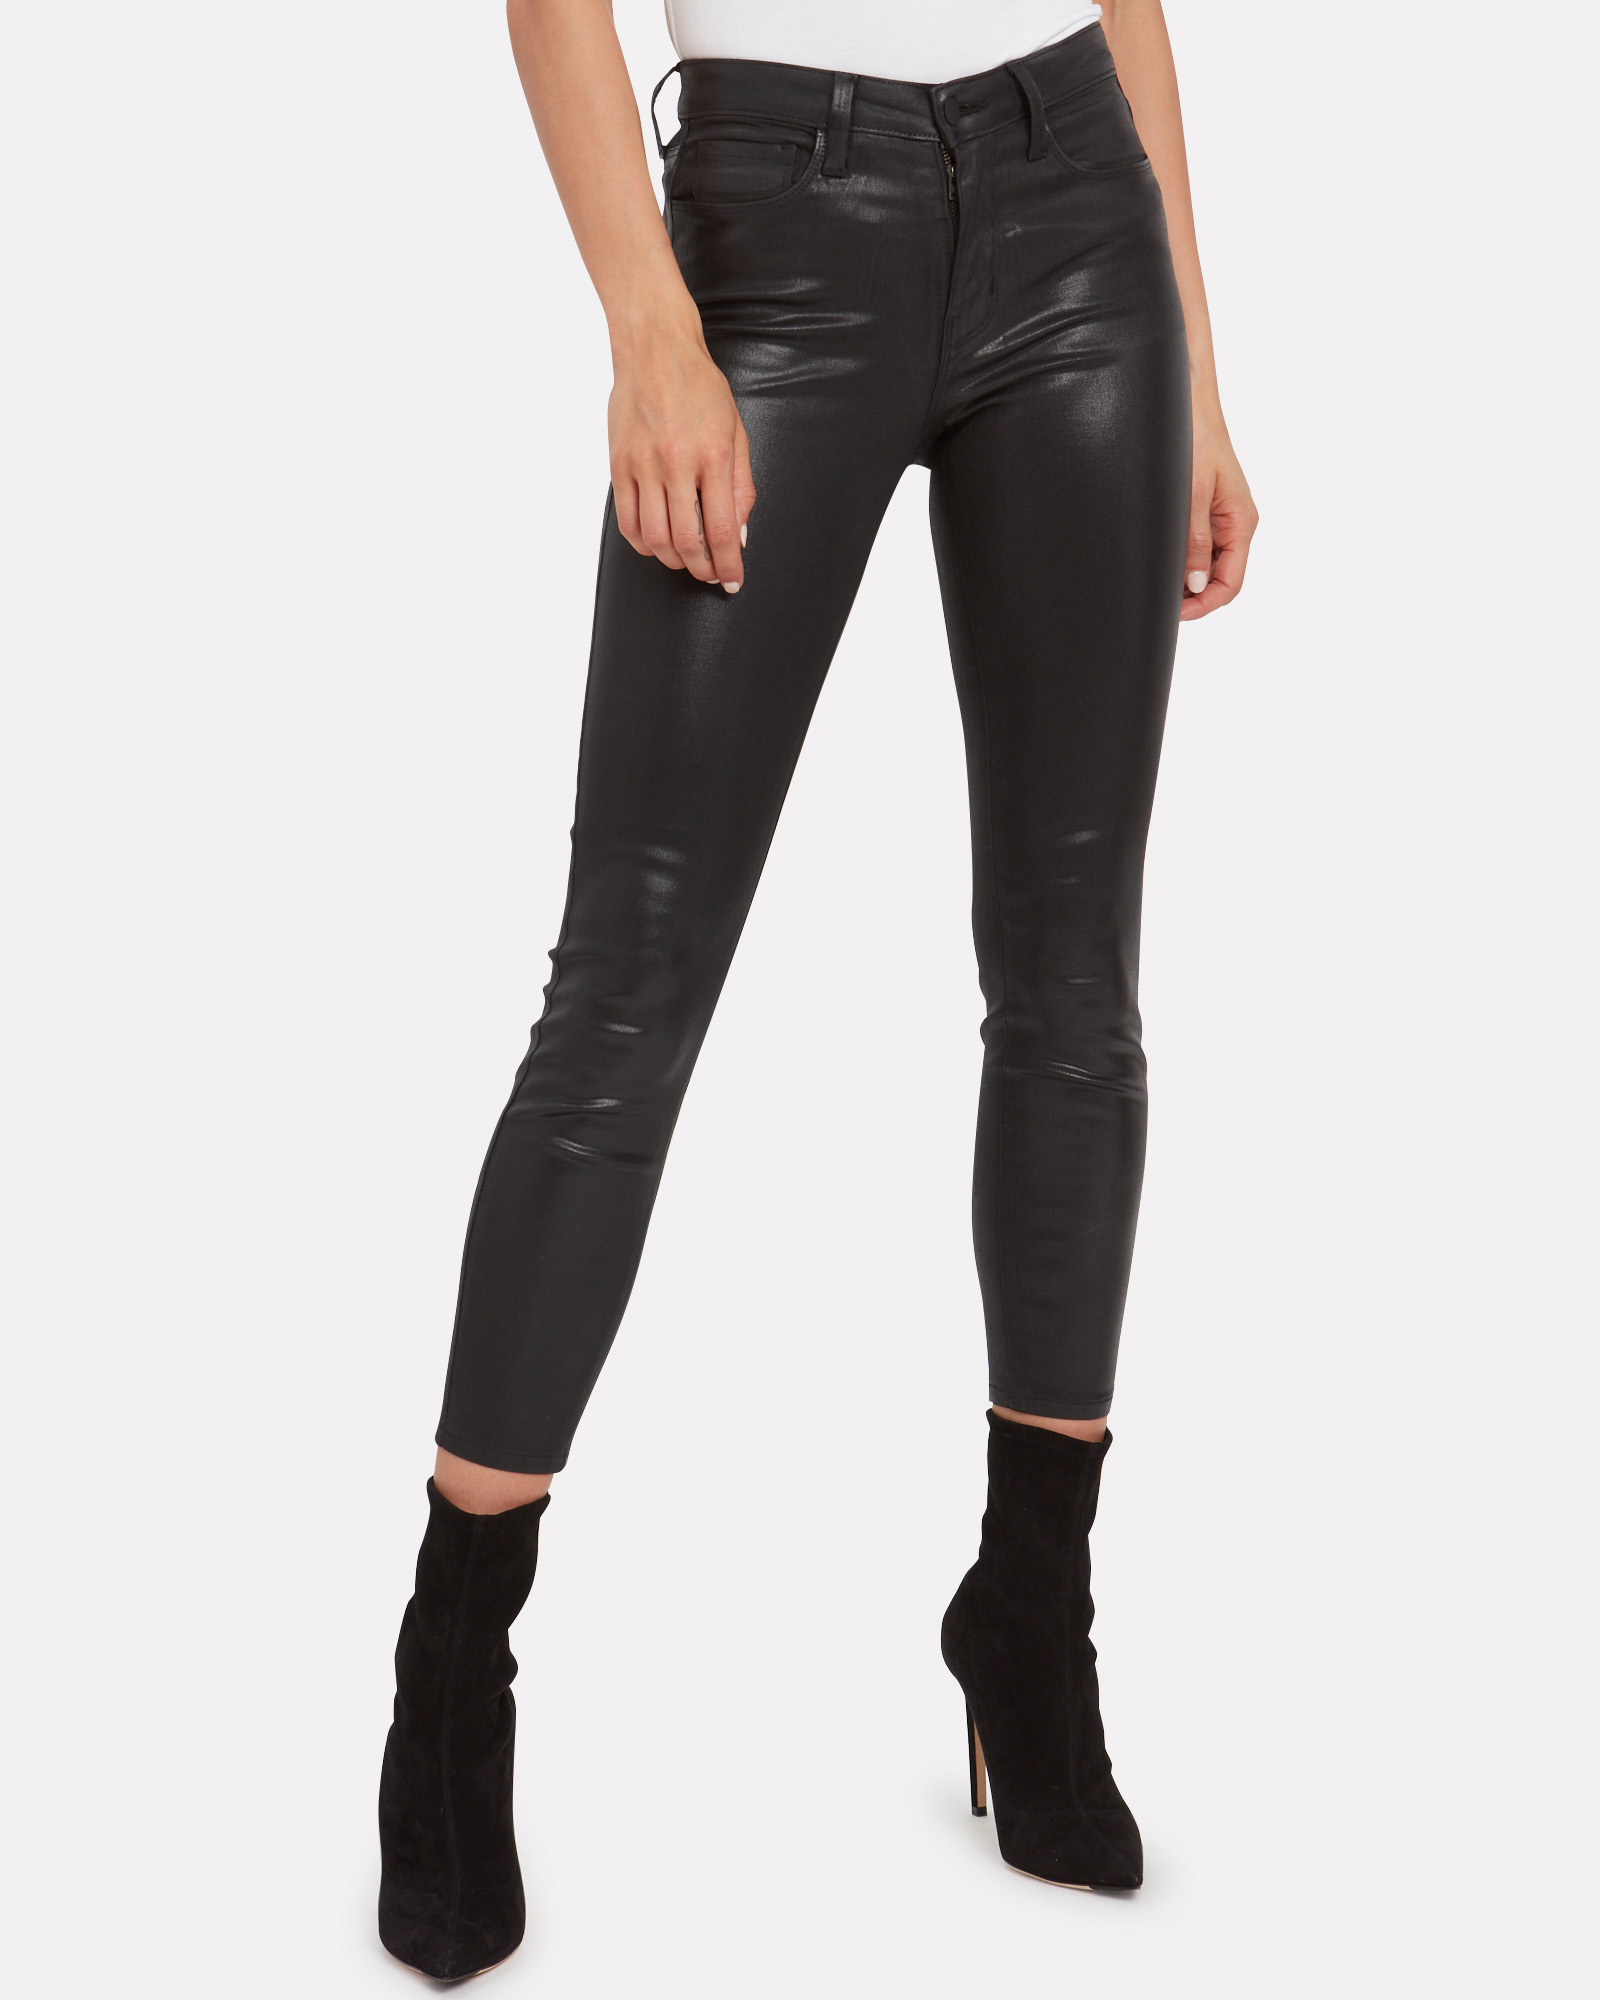 L'Agence | Adelaide Skinny Leather Pants | INTERMIX®